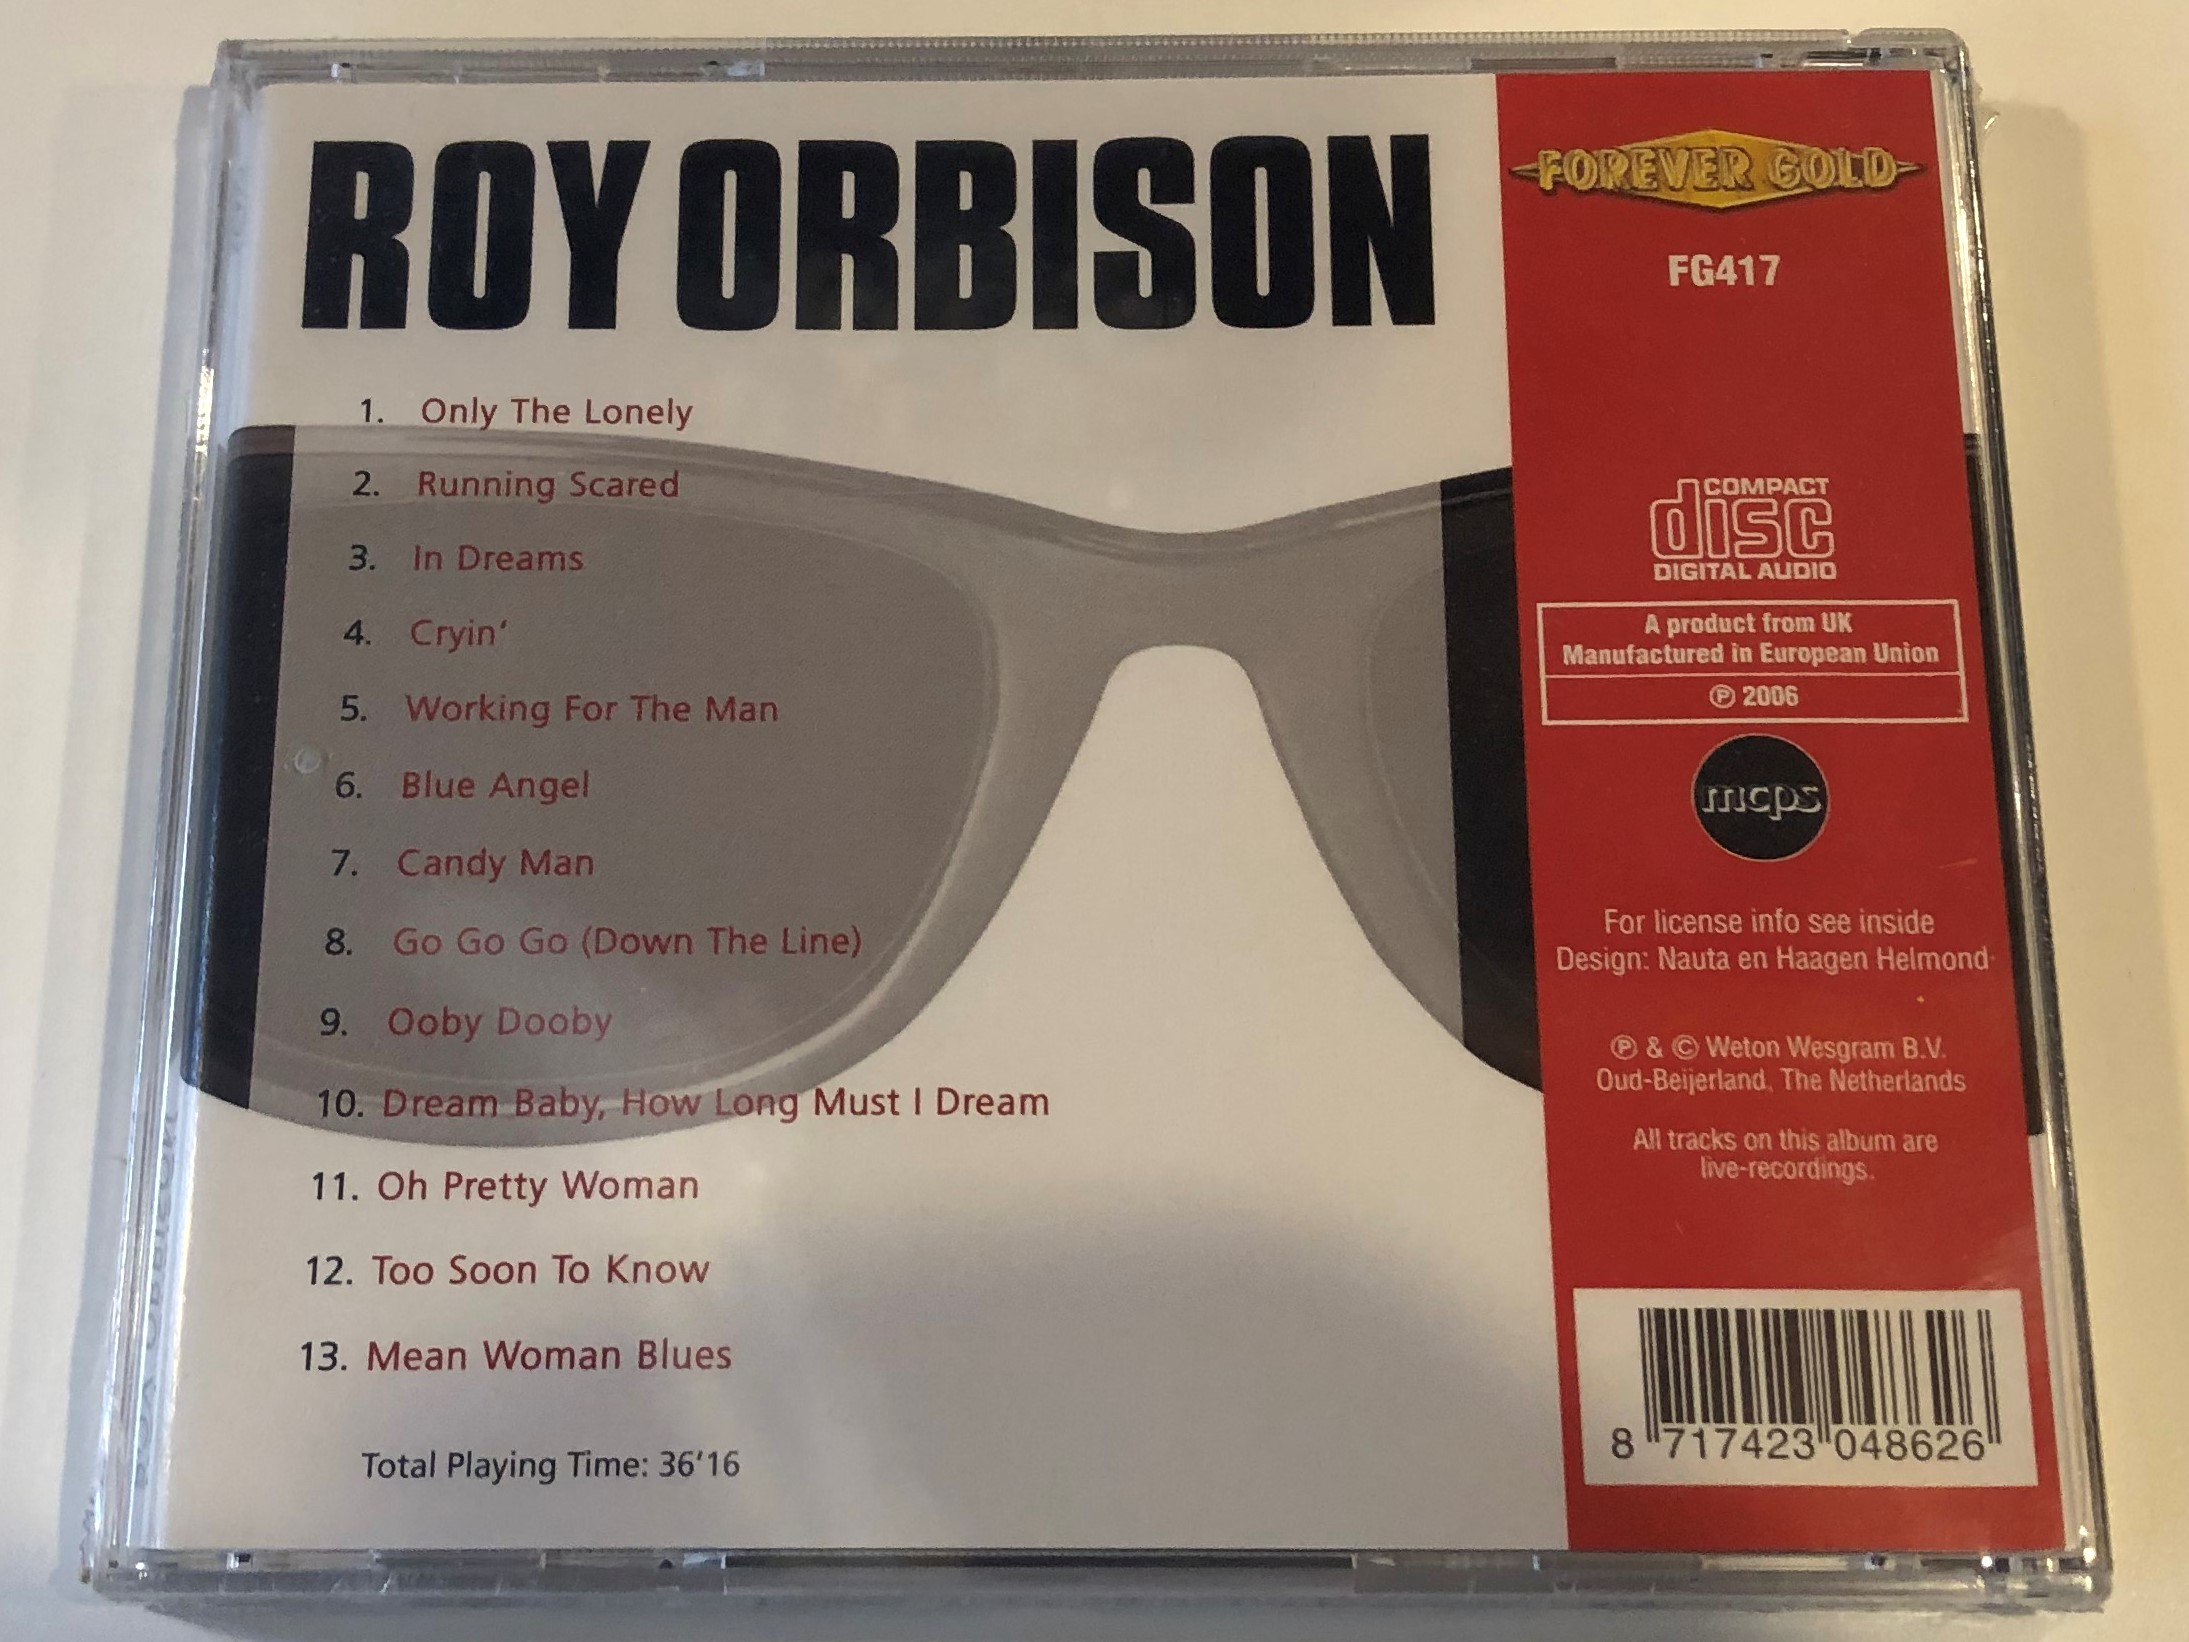 roy-orbison-only-the-lonely-in-dreams-cryin-blue-angel-running-scared-forever-gold-audio-cd-2006-fg417-2-.jpg